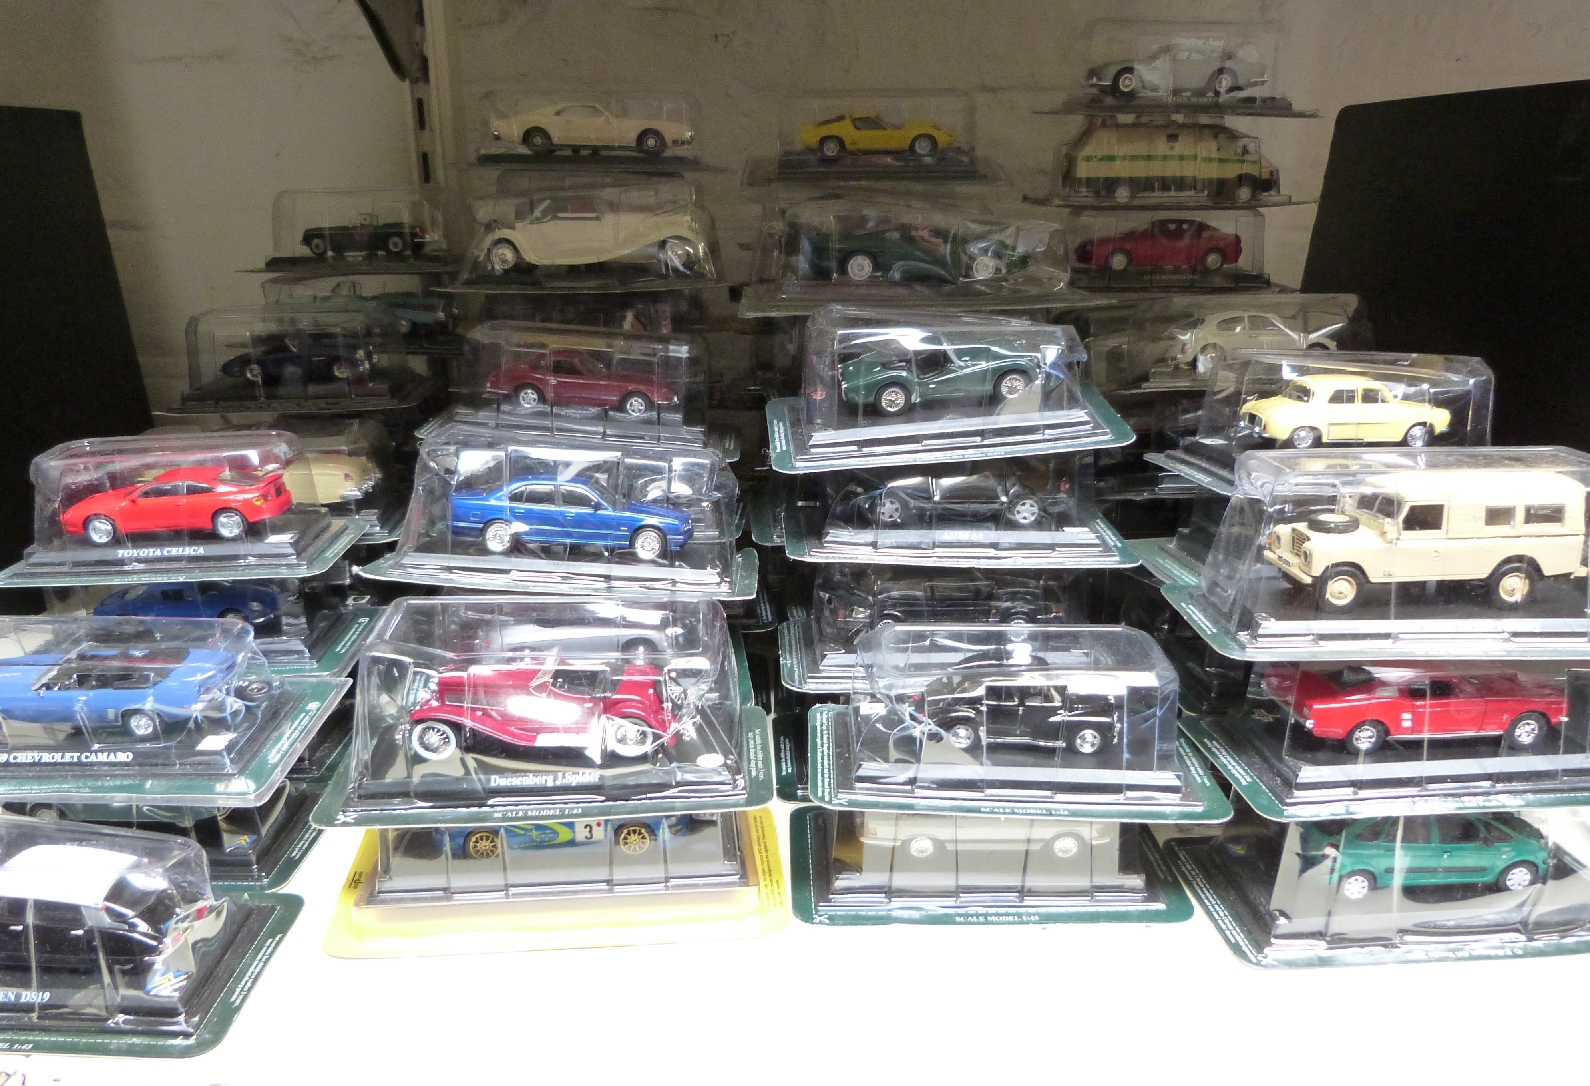 Eighty Del Prado diecast model cars, all in original bubble packed boxes.